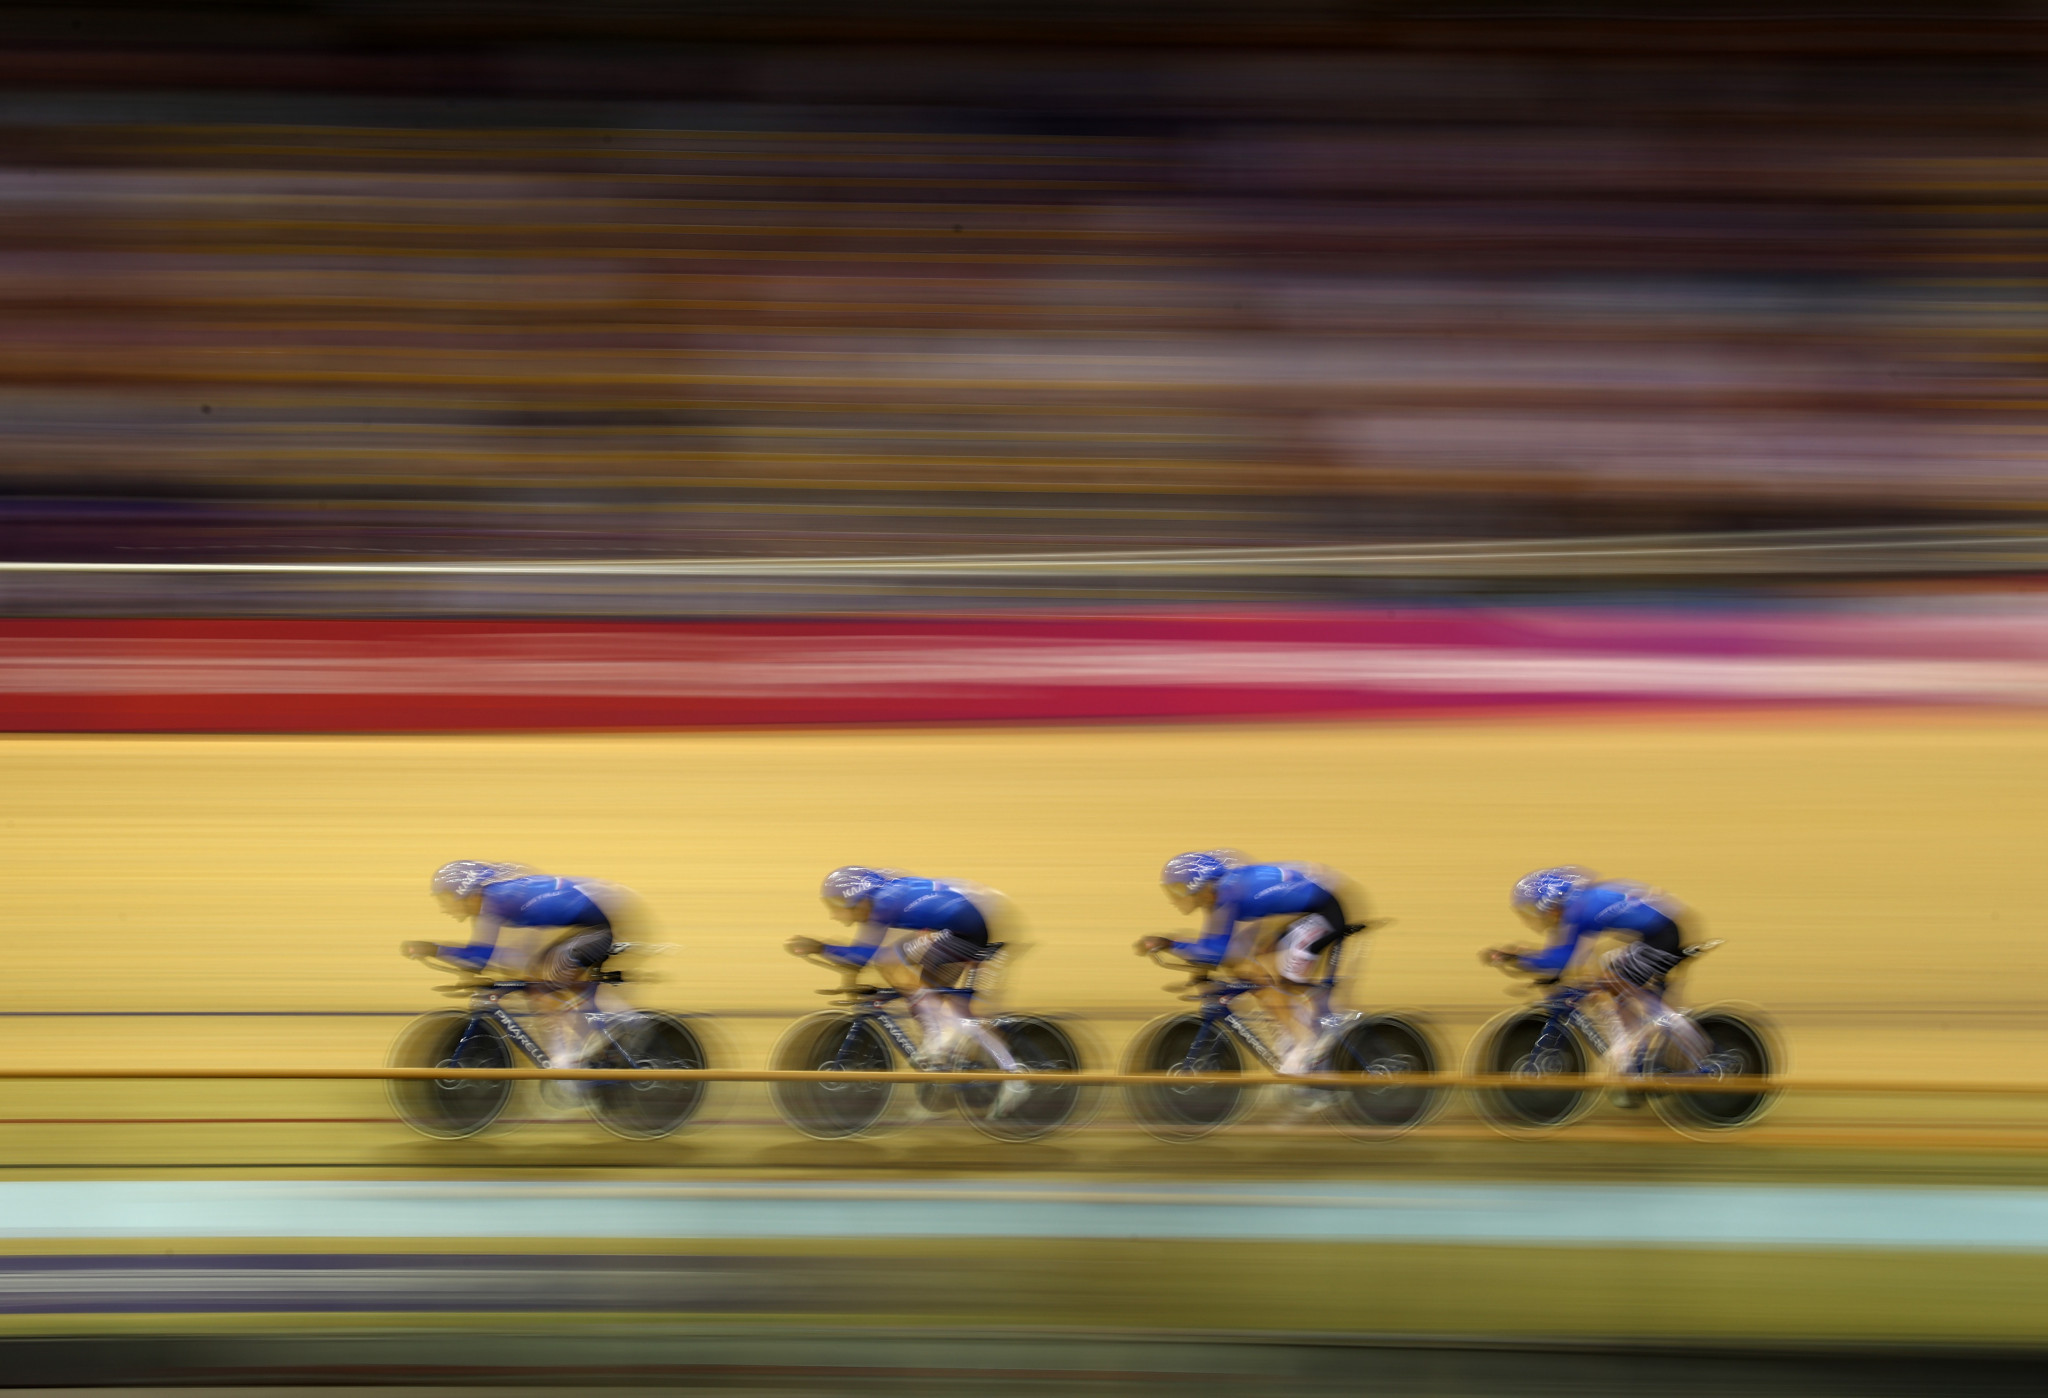 Italy clinched first place in men's qualifying after an impressive ride ©Getty Images